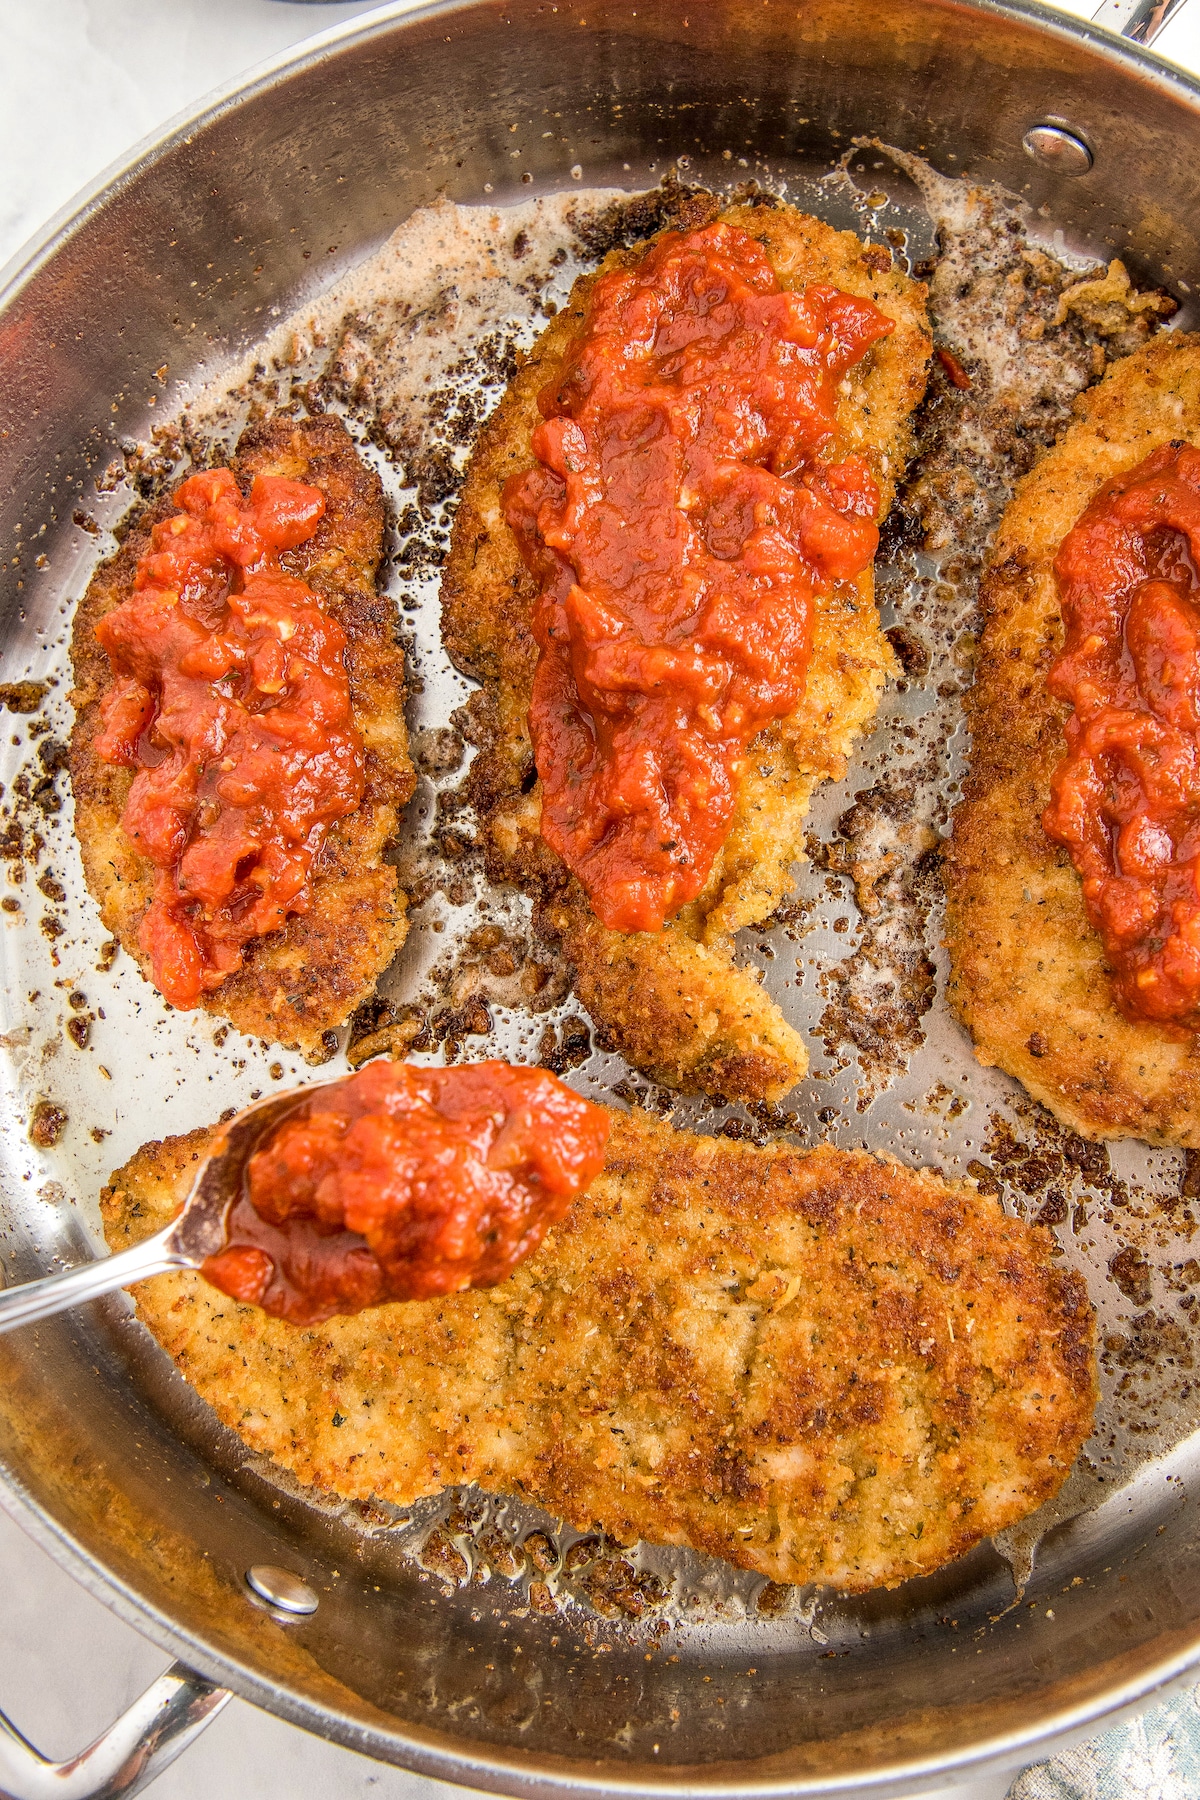 Pan fried chicken breasts being topped with marinara sauce.